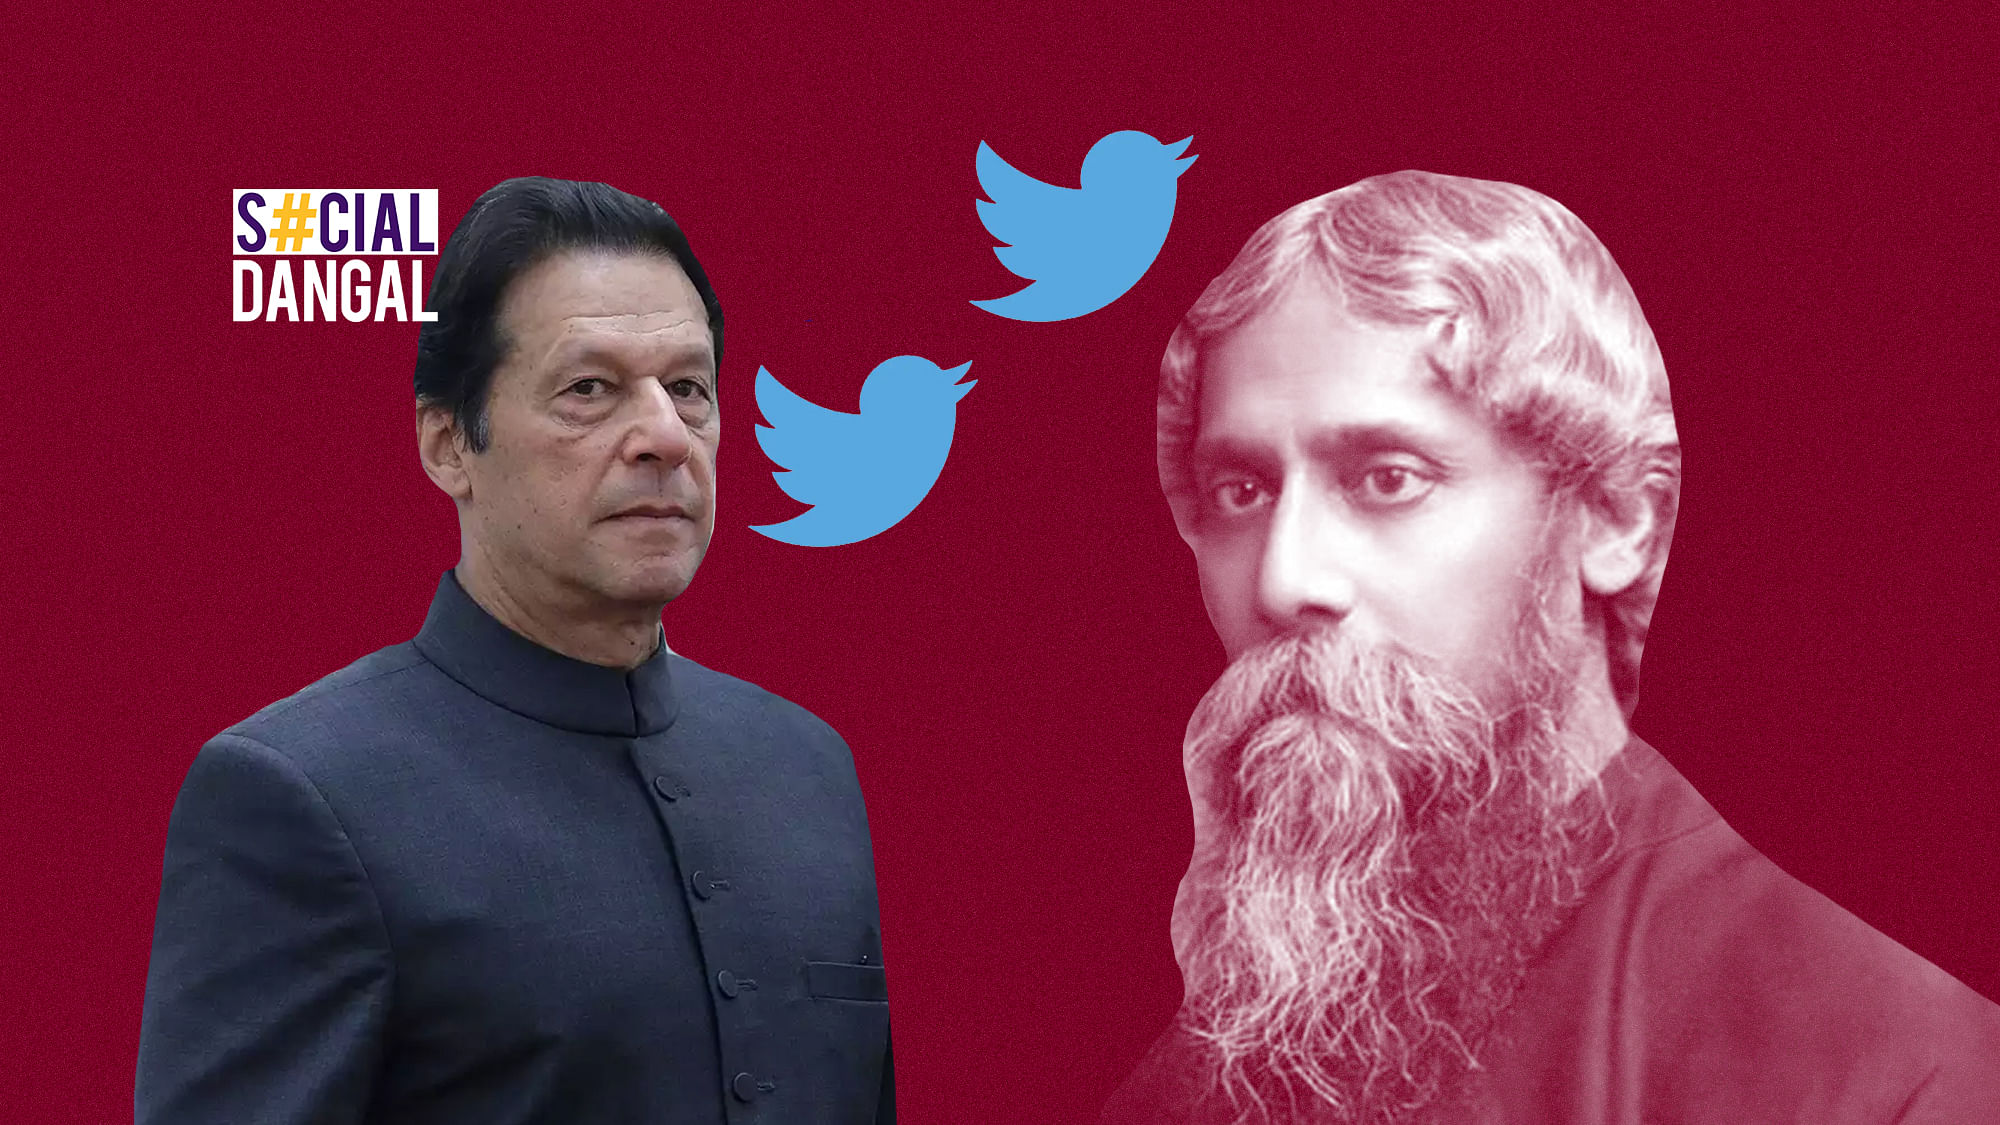 Pakistan PM Imran Khan attributed Tagore’s quote to Gibran in a tweet. It did not go down well with the Twitterati.